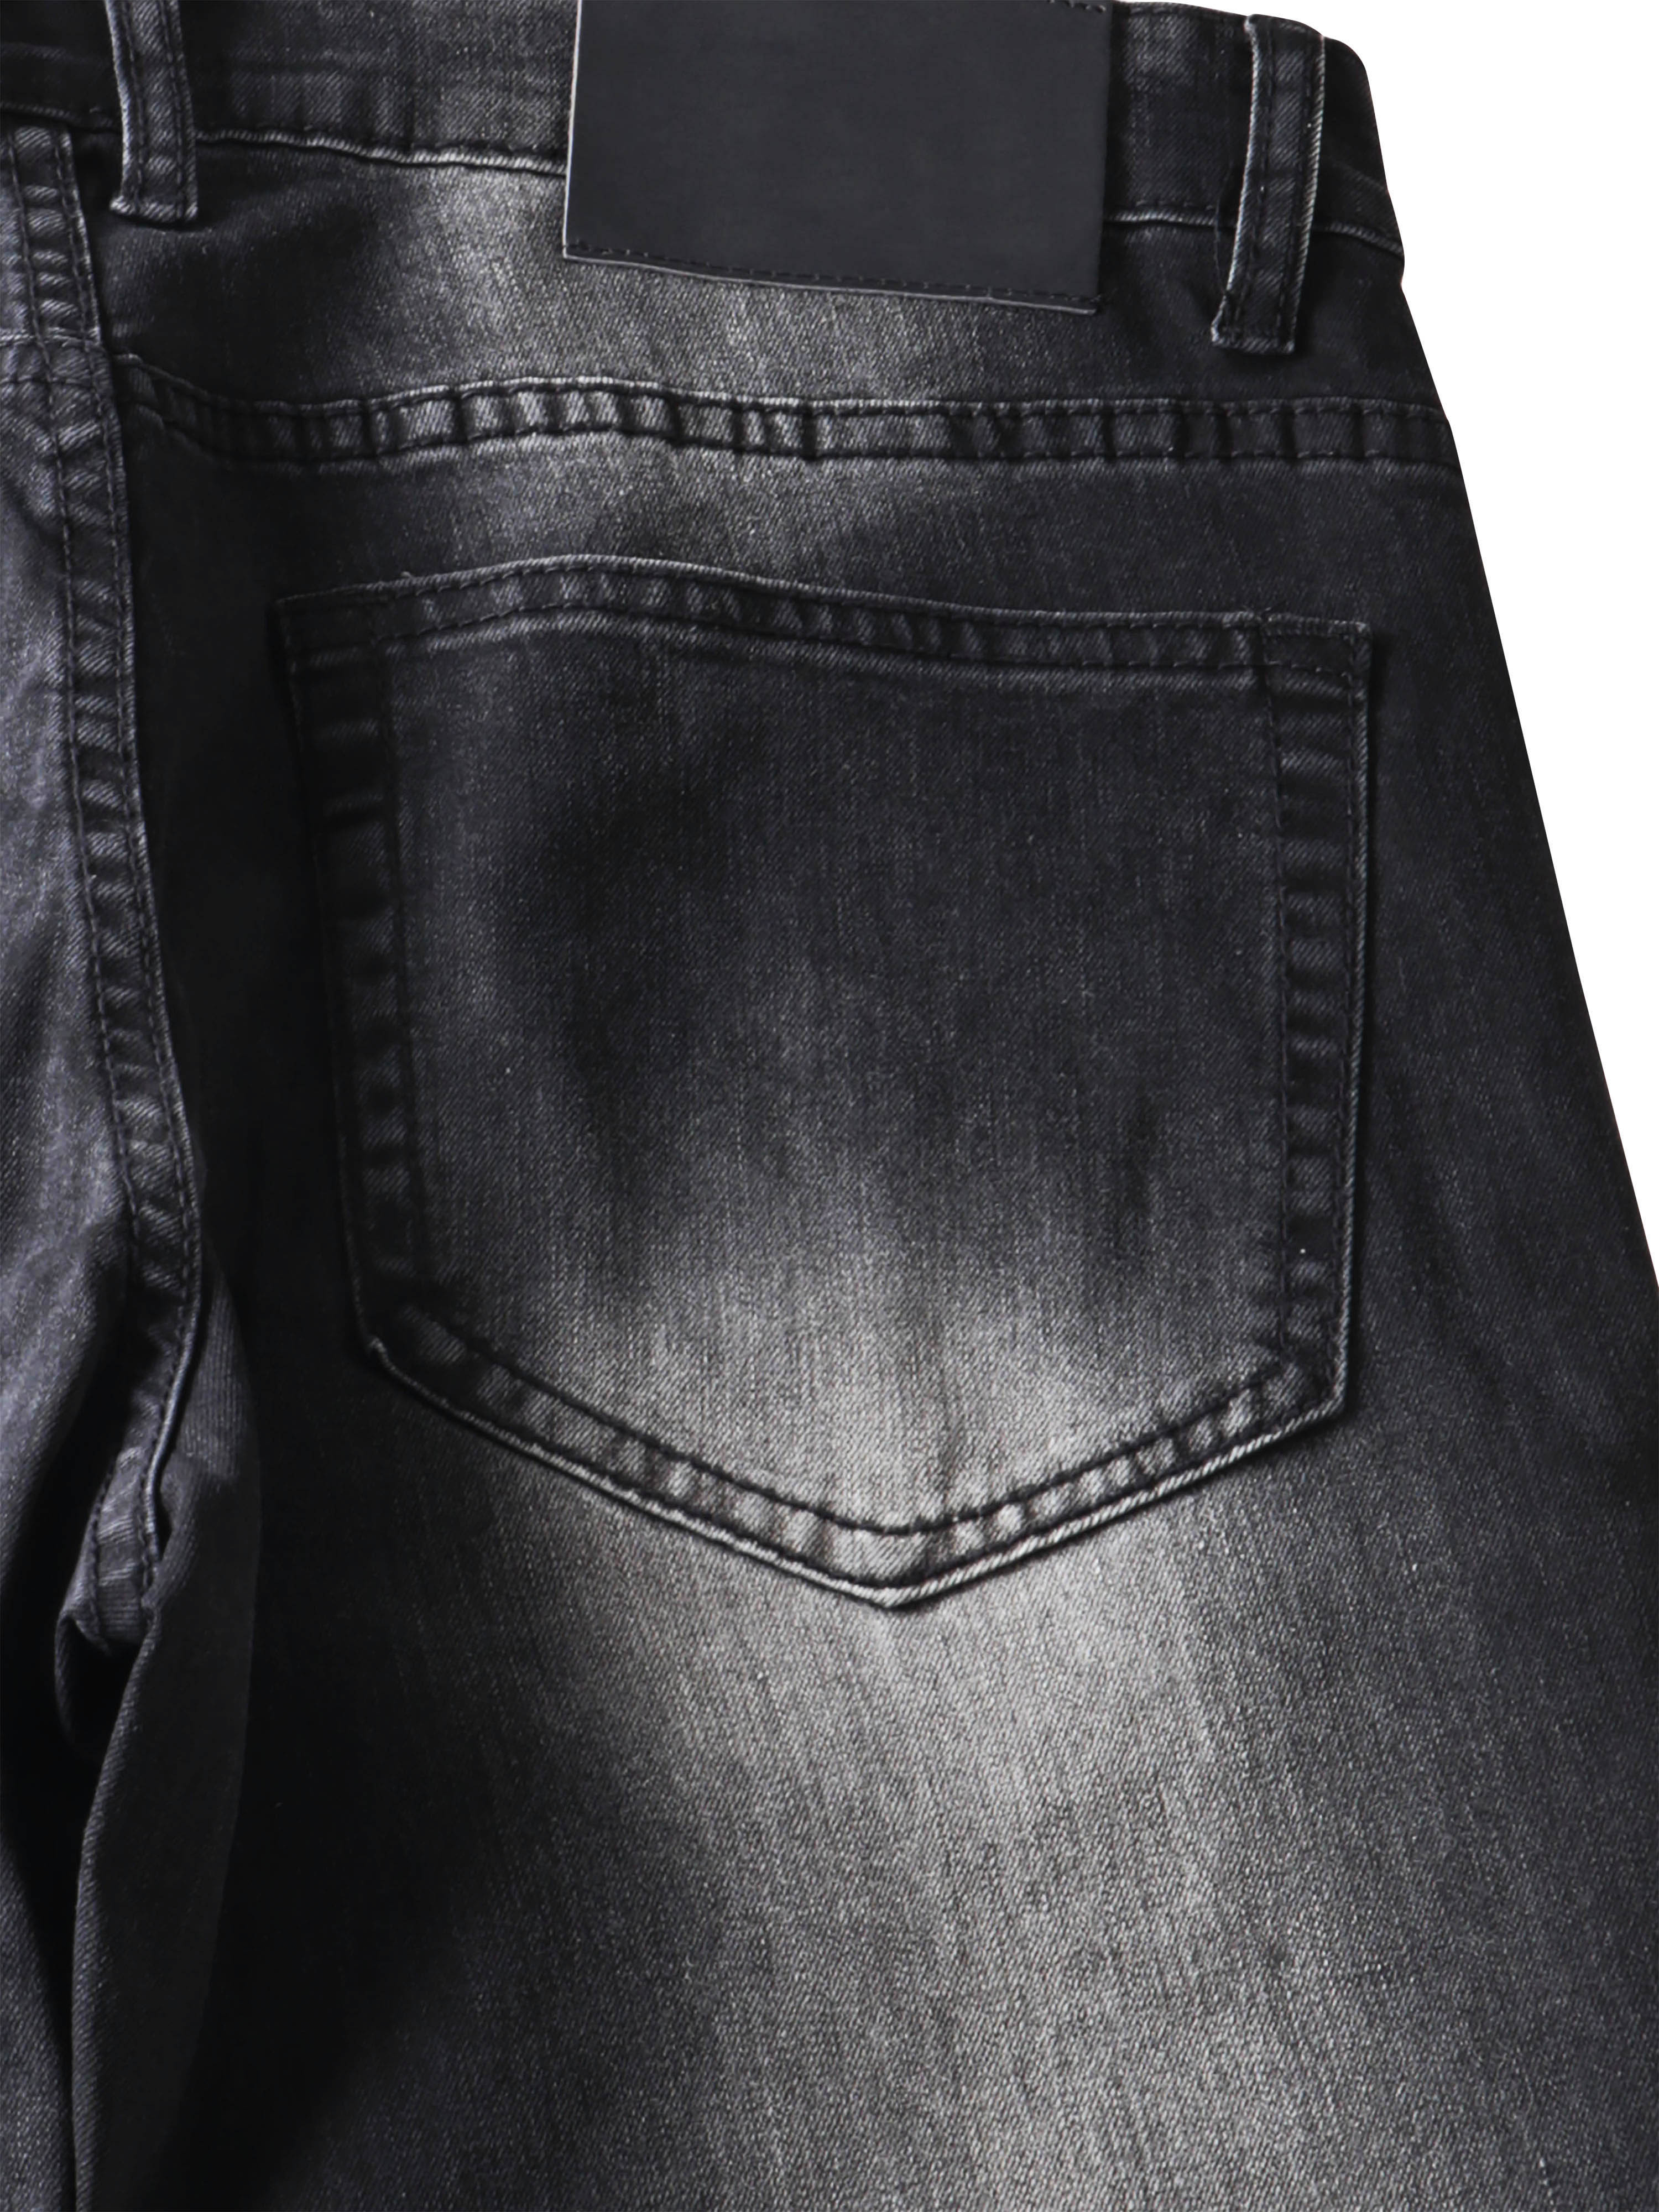 Ma Croix Mens Distressed Skinny Fit Denim Jeans with Zipper Pocket - image 5 of 6